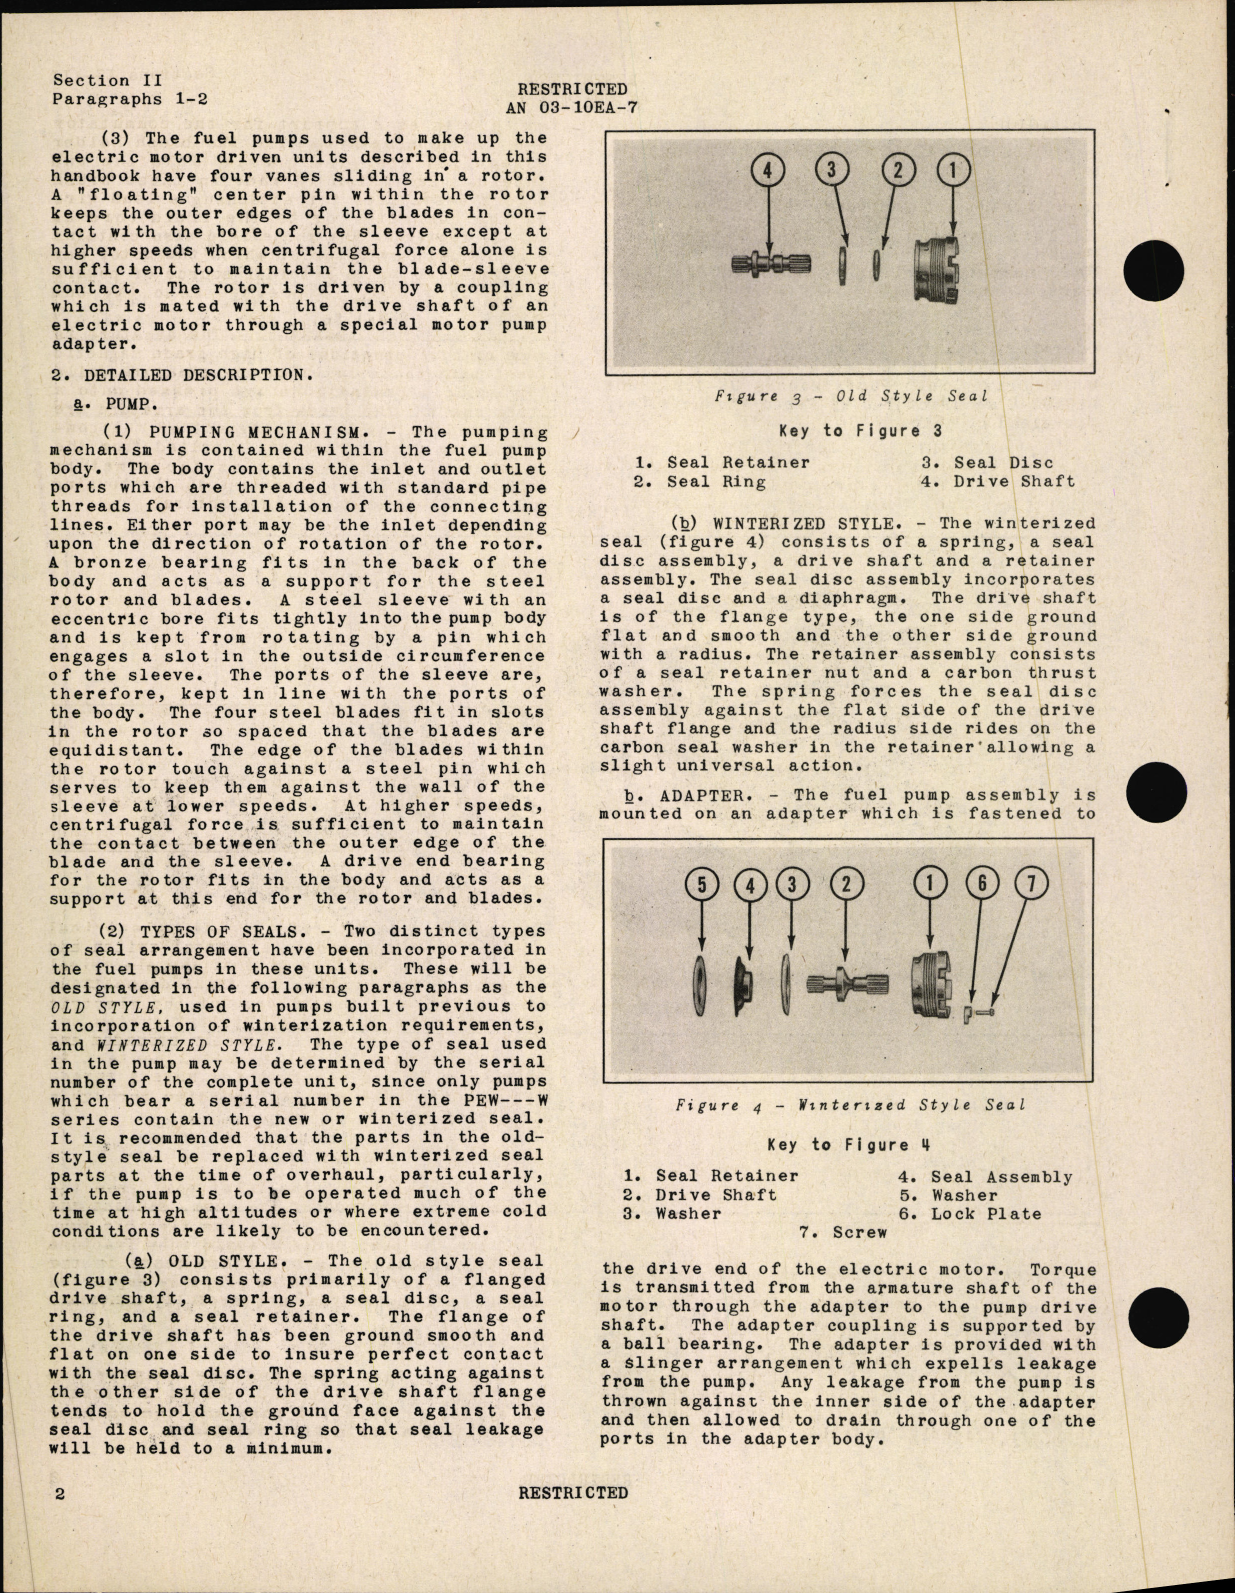 Sample page 6 from AirCorps Library document: Handbook of Instructions with Parts Catalog for Type F-7 Electric Motor Driven Fuel Pumps